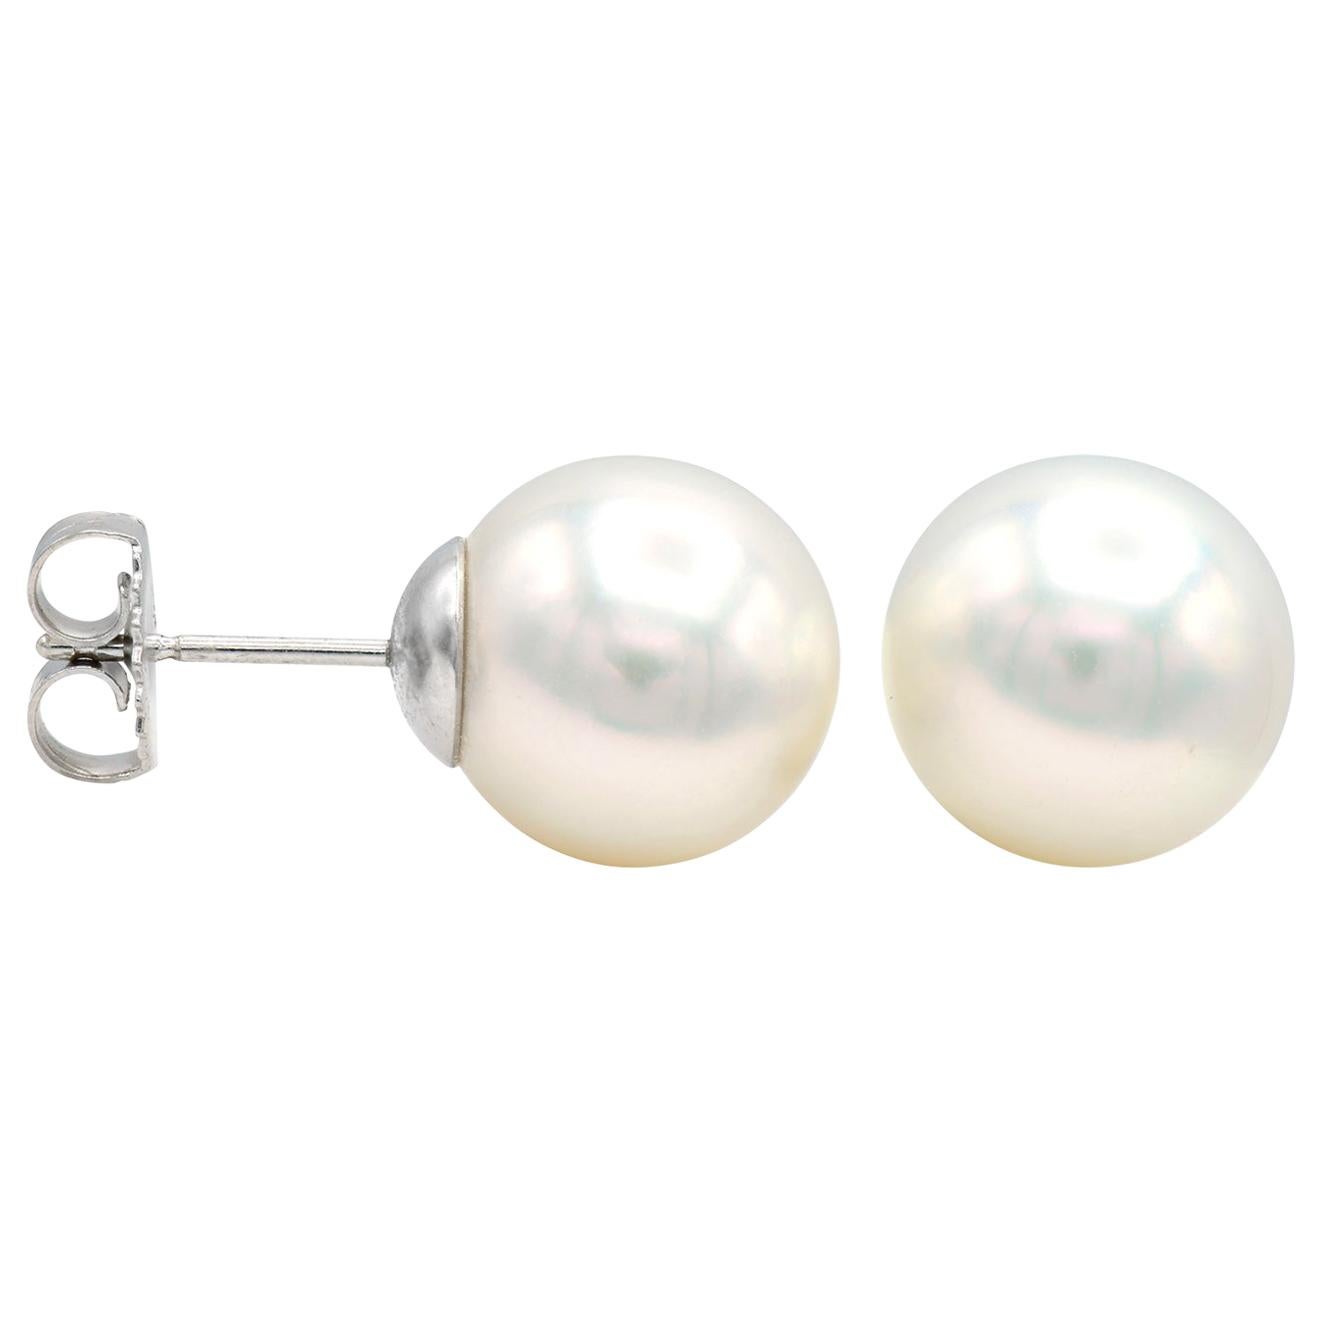 10-10.5mm South Sea Pearl Stud Earrings with 14 Karat White Gold Post and Backs For Sale